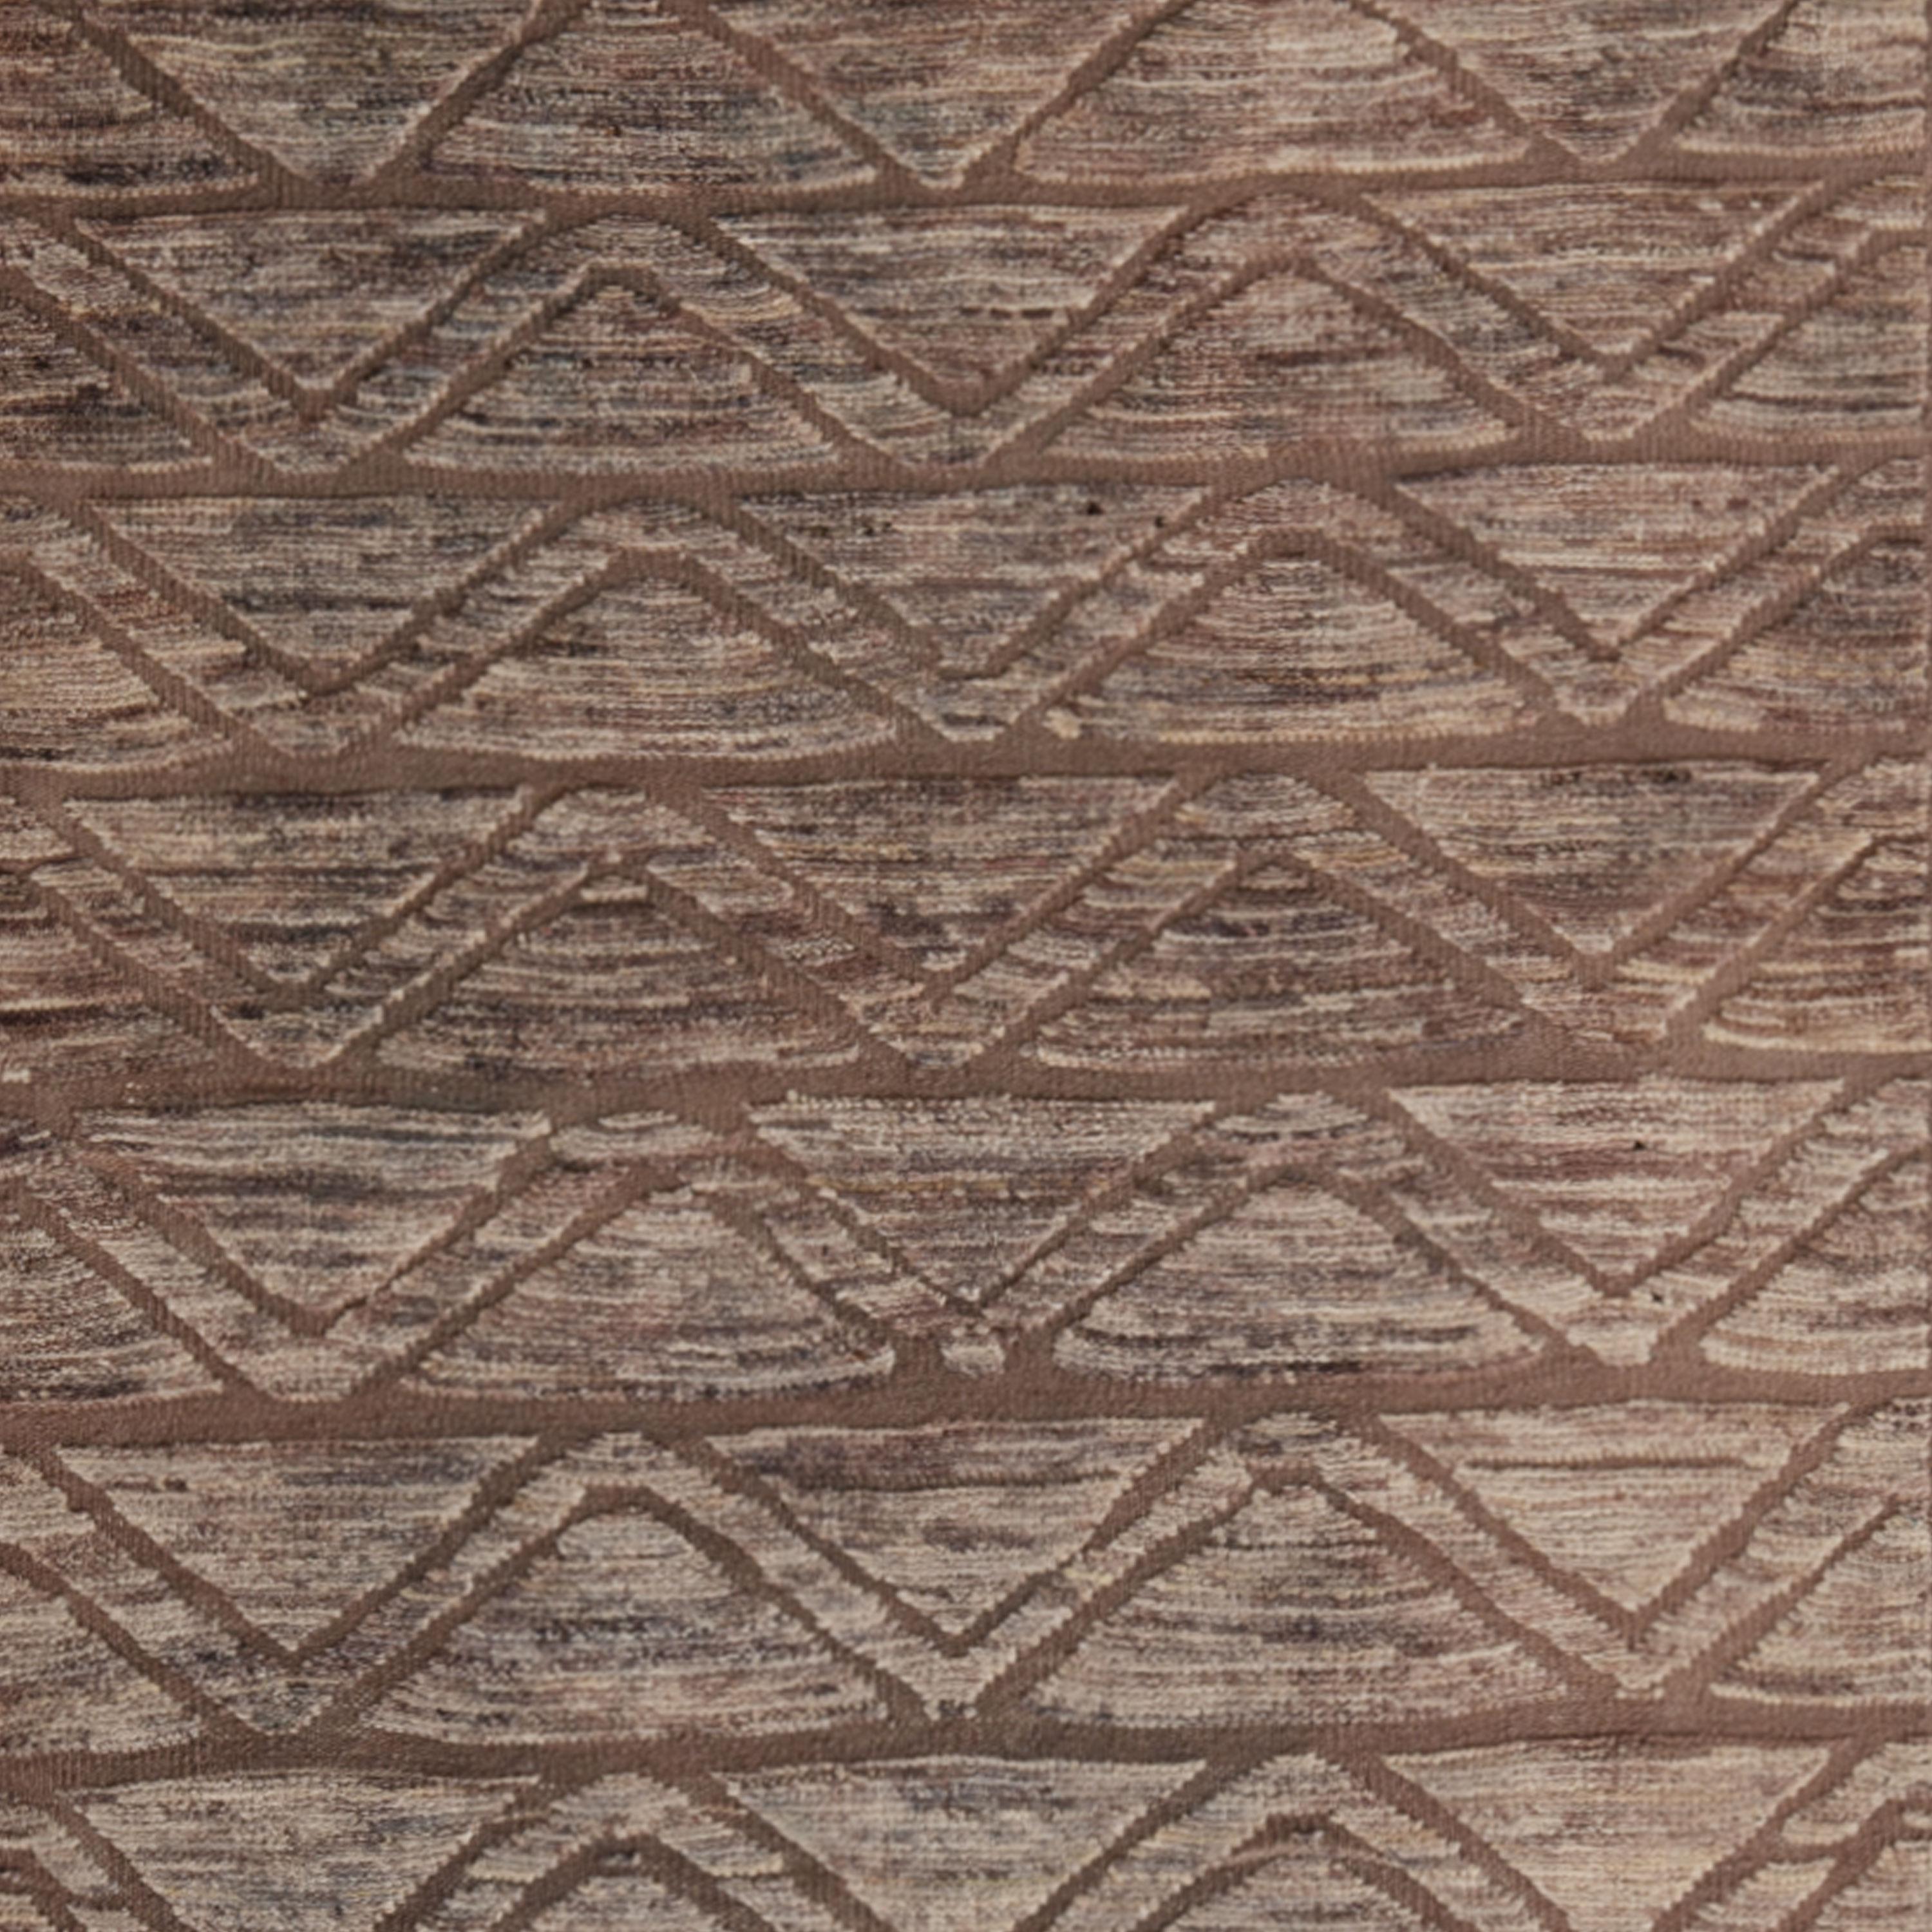 Hand-Knotted abc carpet Brown Zameen Transitional Wool Runner - 3' x 9'10